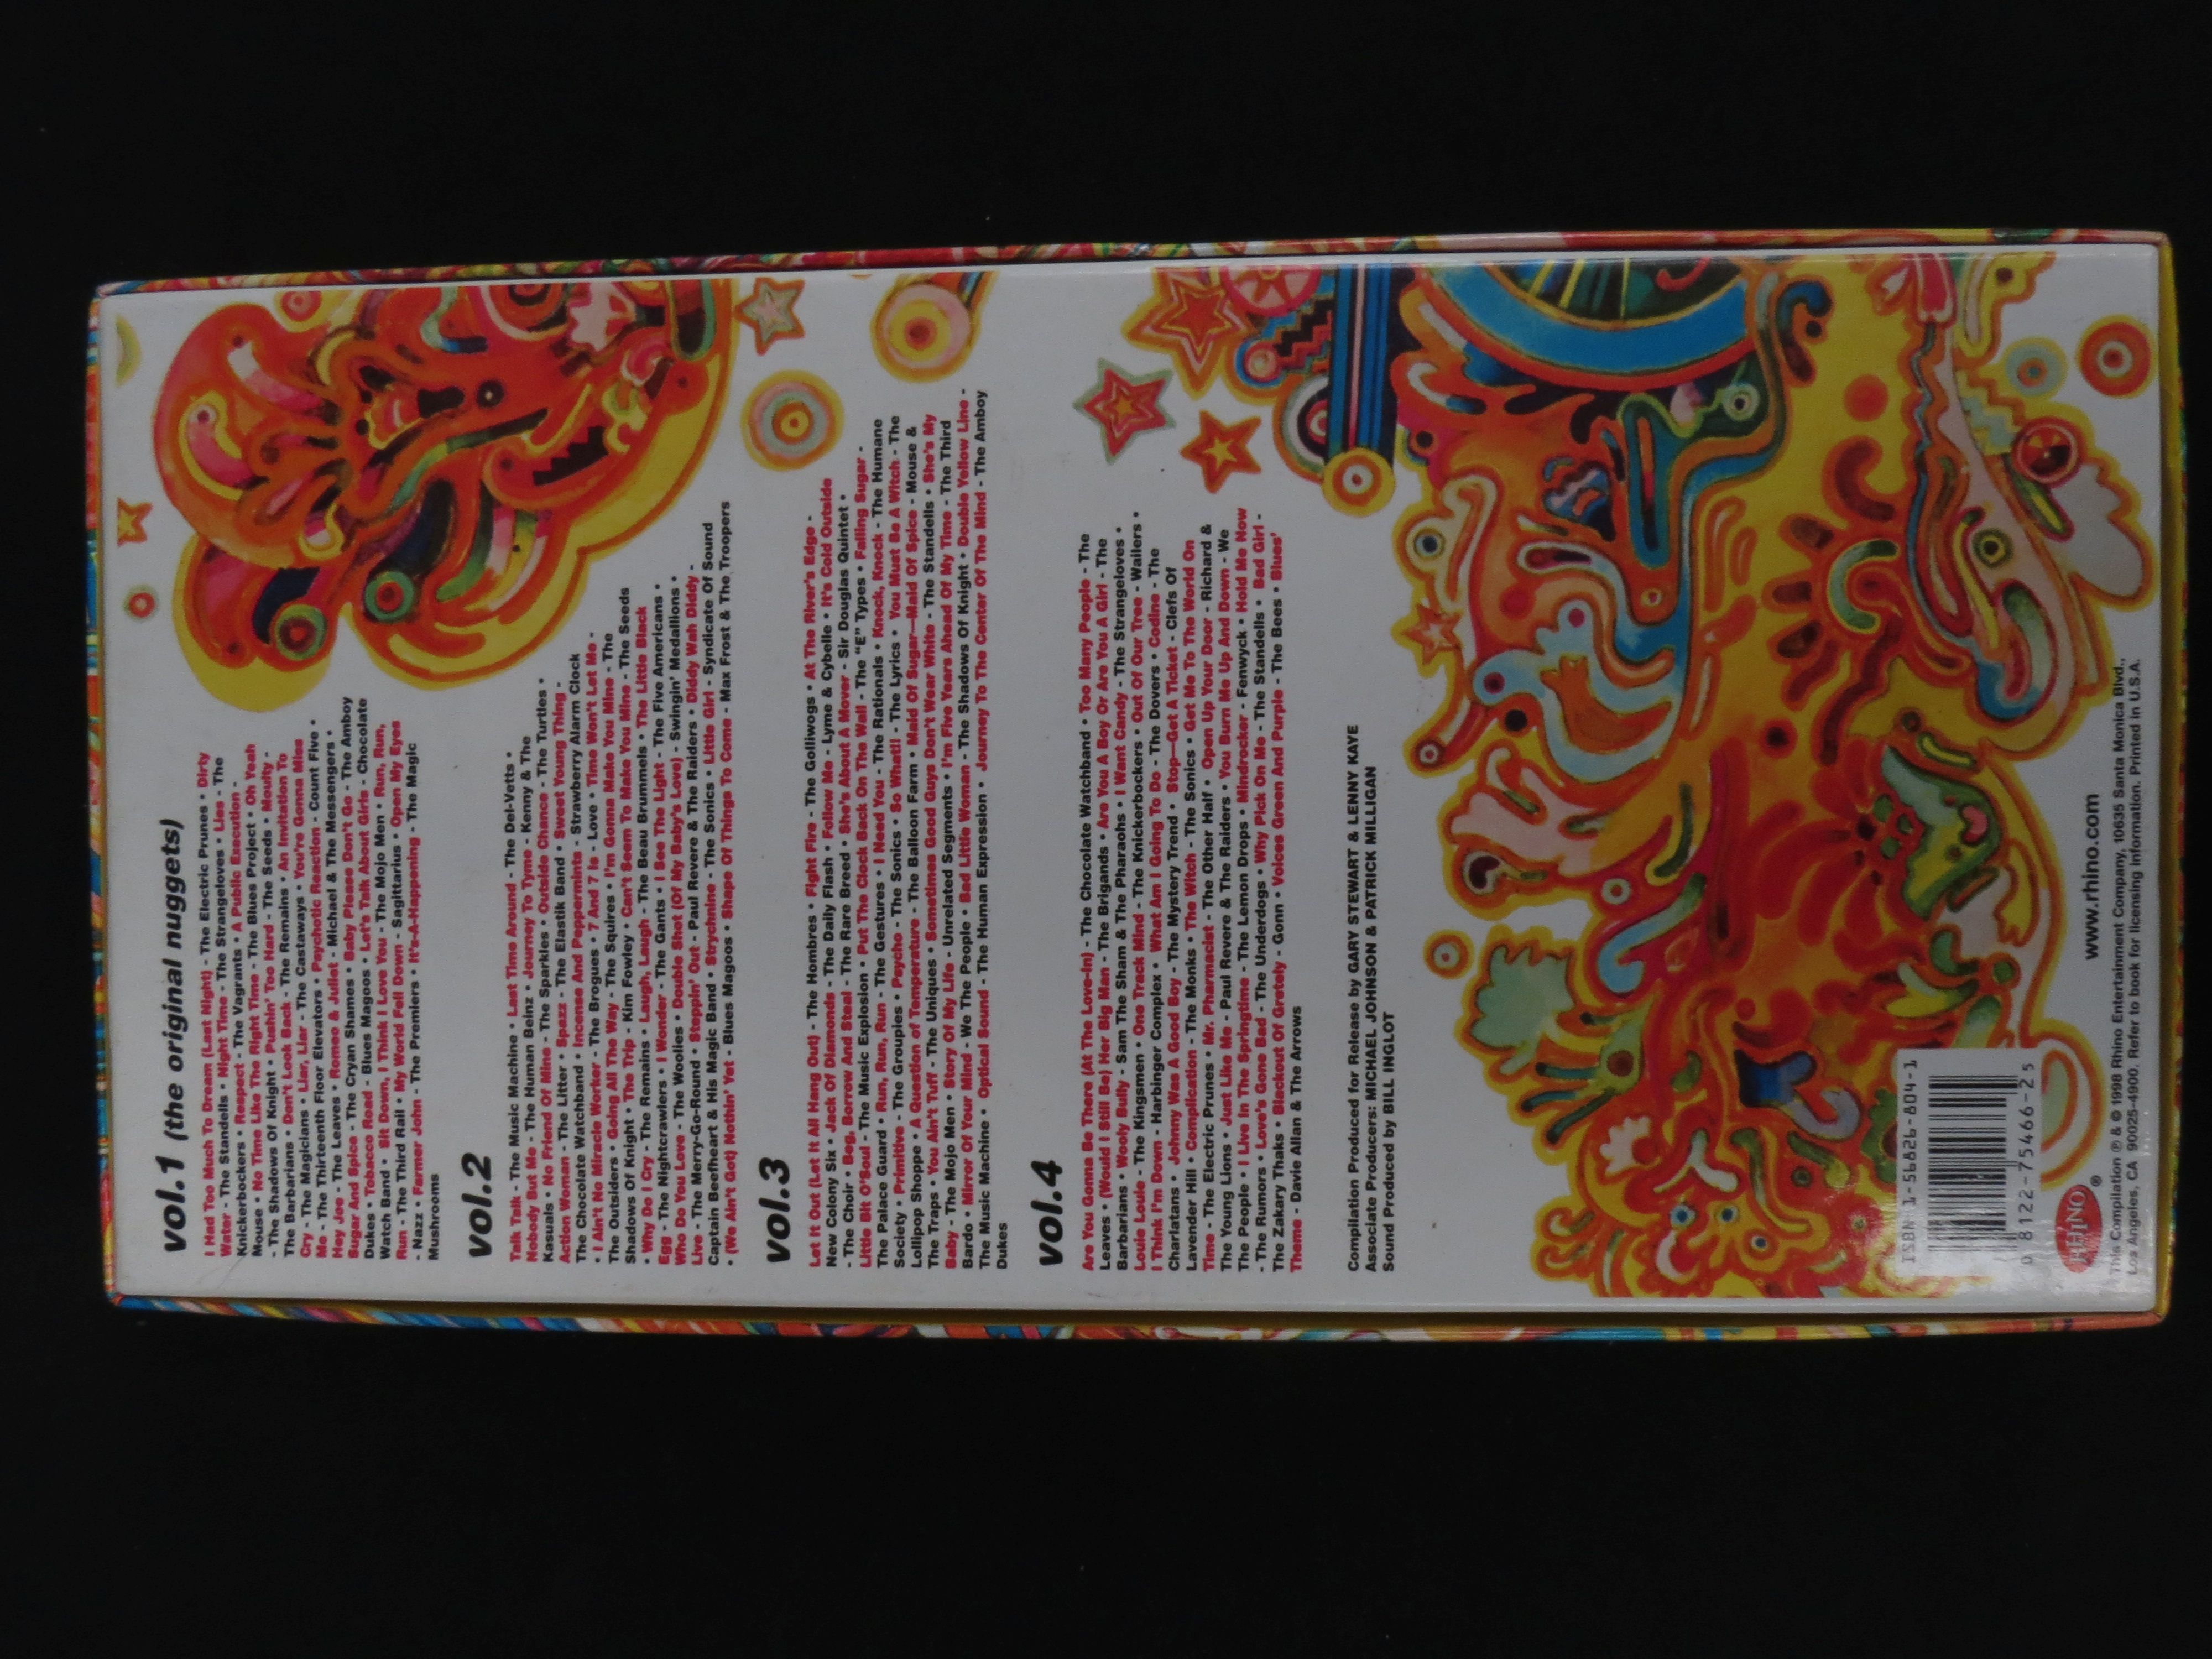 CDs - Two Nuggets CD Box Sets to include 1965-1968 & ii 1964-1969, some box marks but vg overall - Image 3 of 7